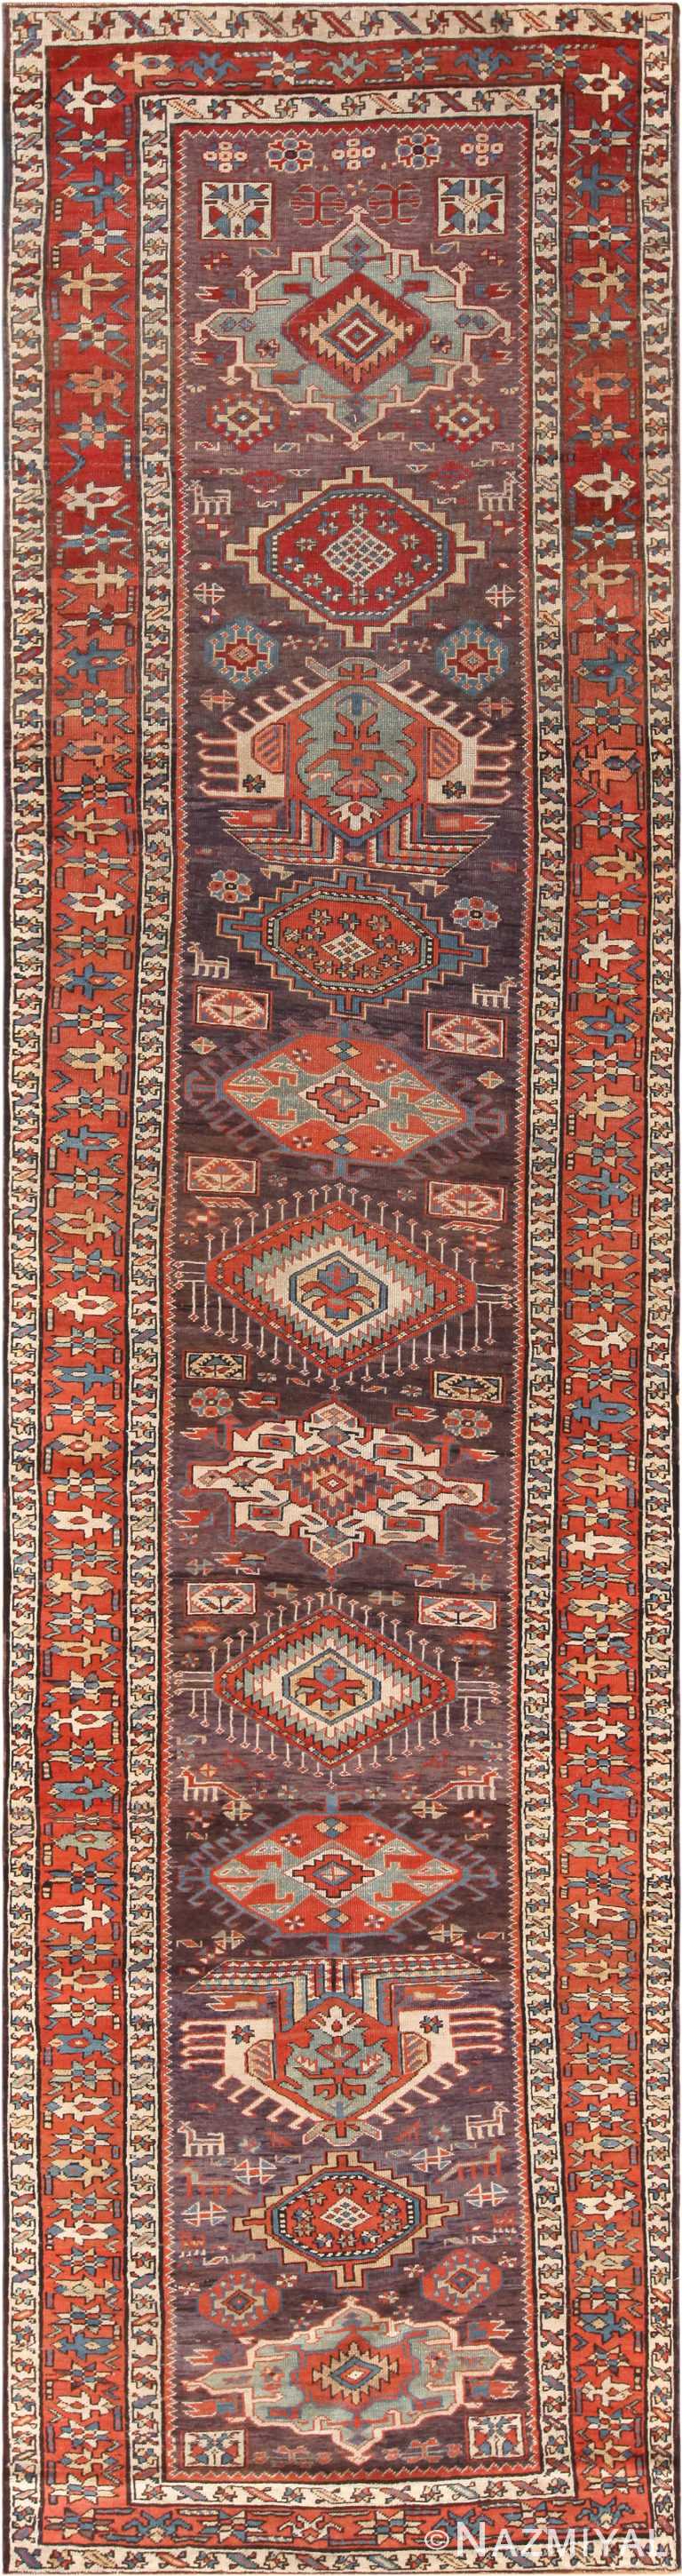 Antique North West Persian Tribal Runner Rug 72110 by Nazmiyal Antique Rugs